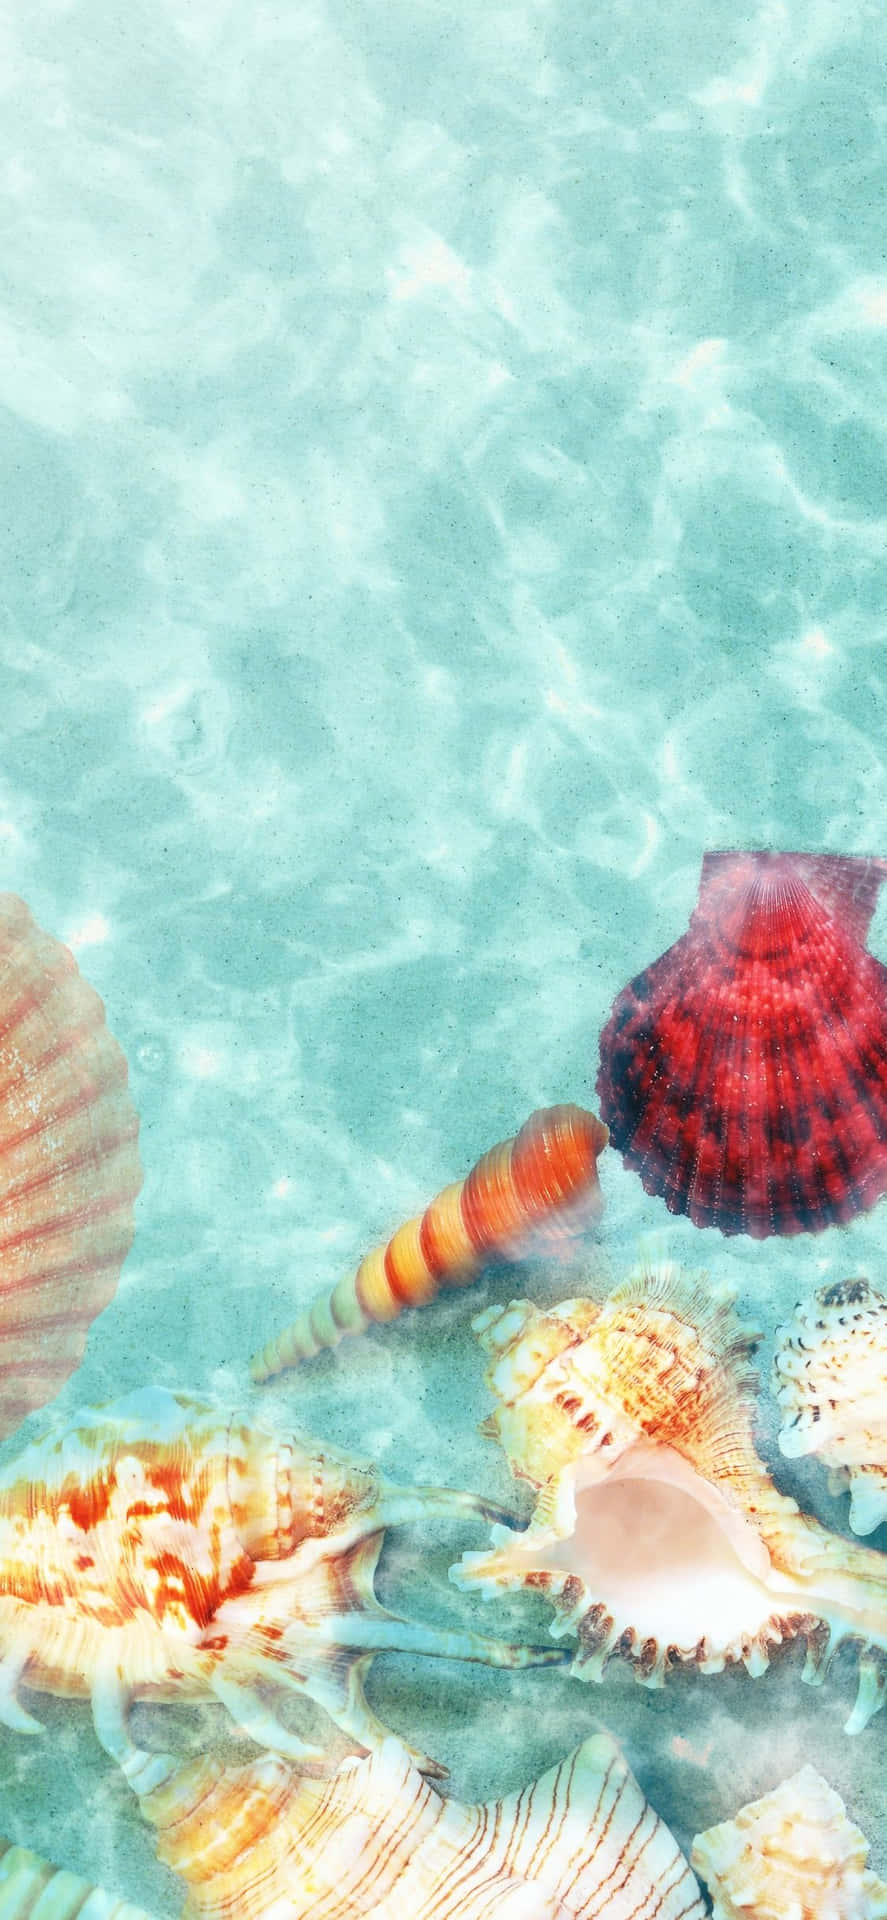 Seashells Submerged In Water iPhone X Summer Background